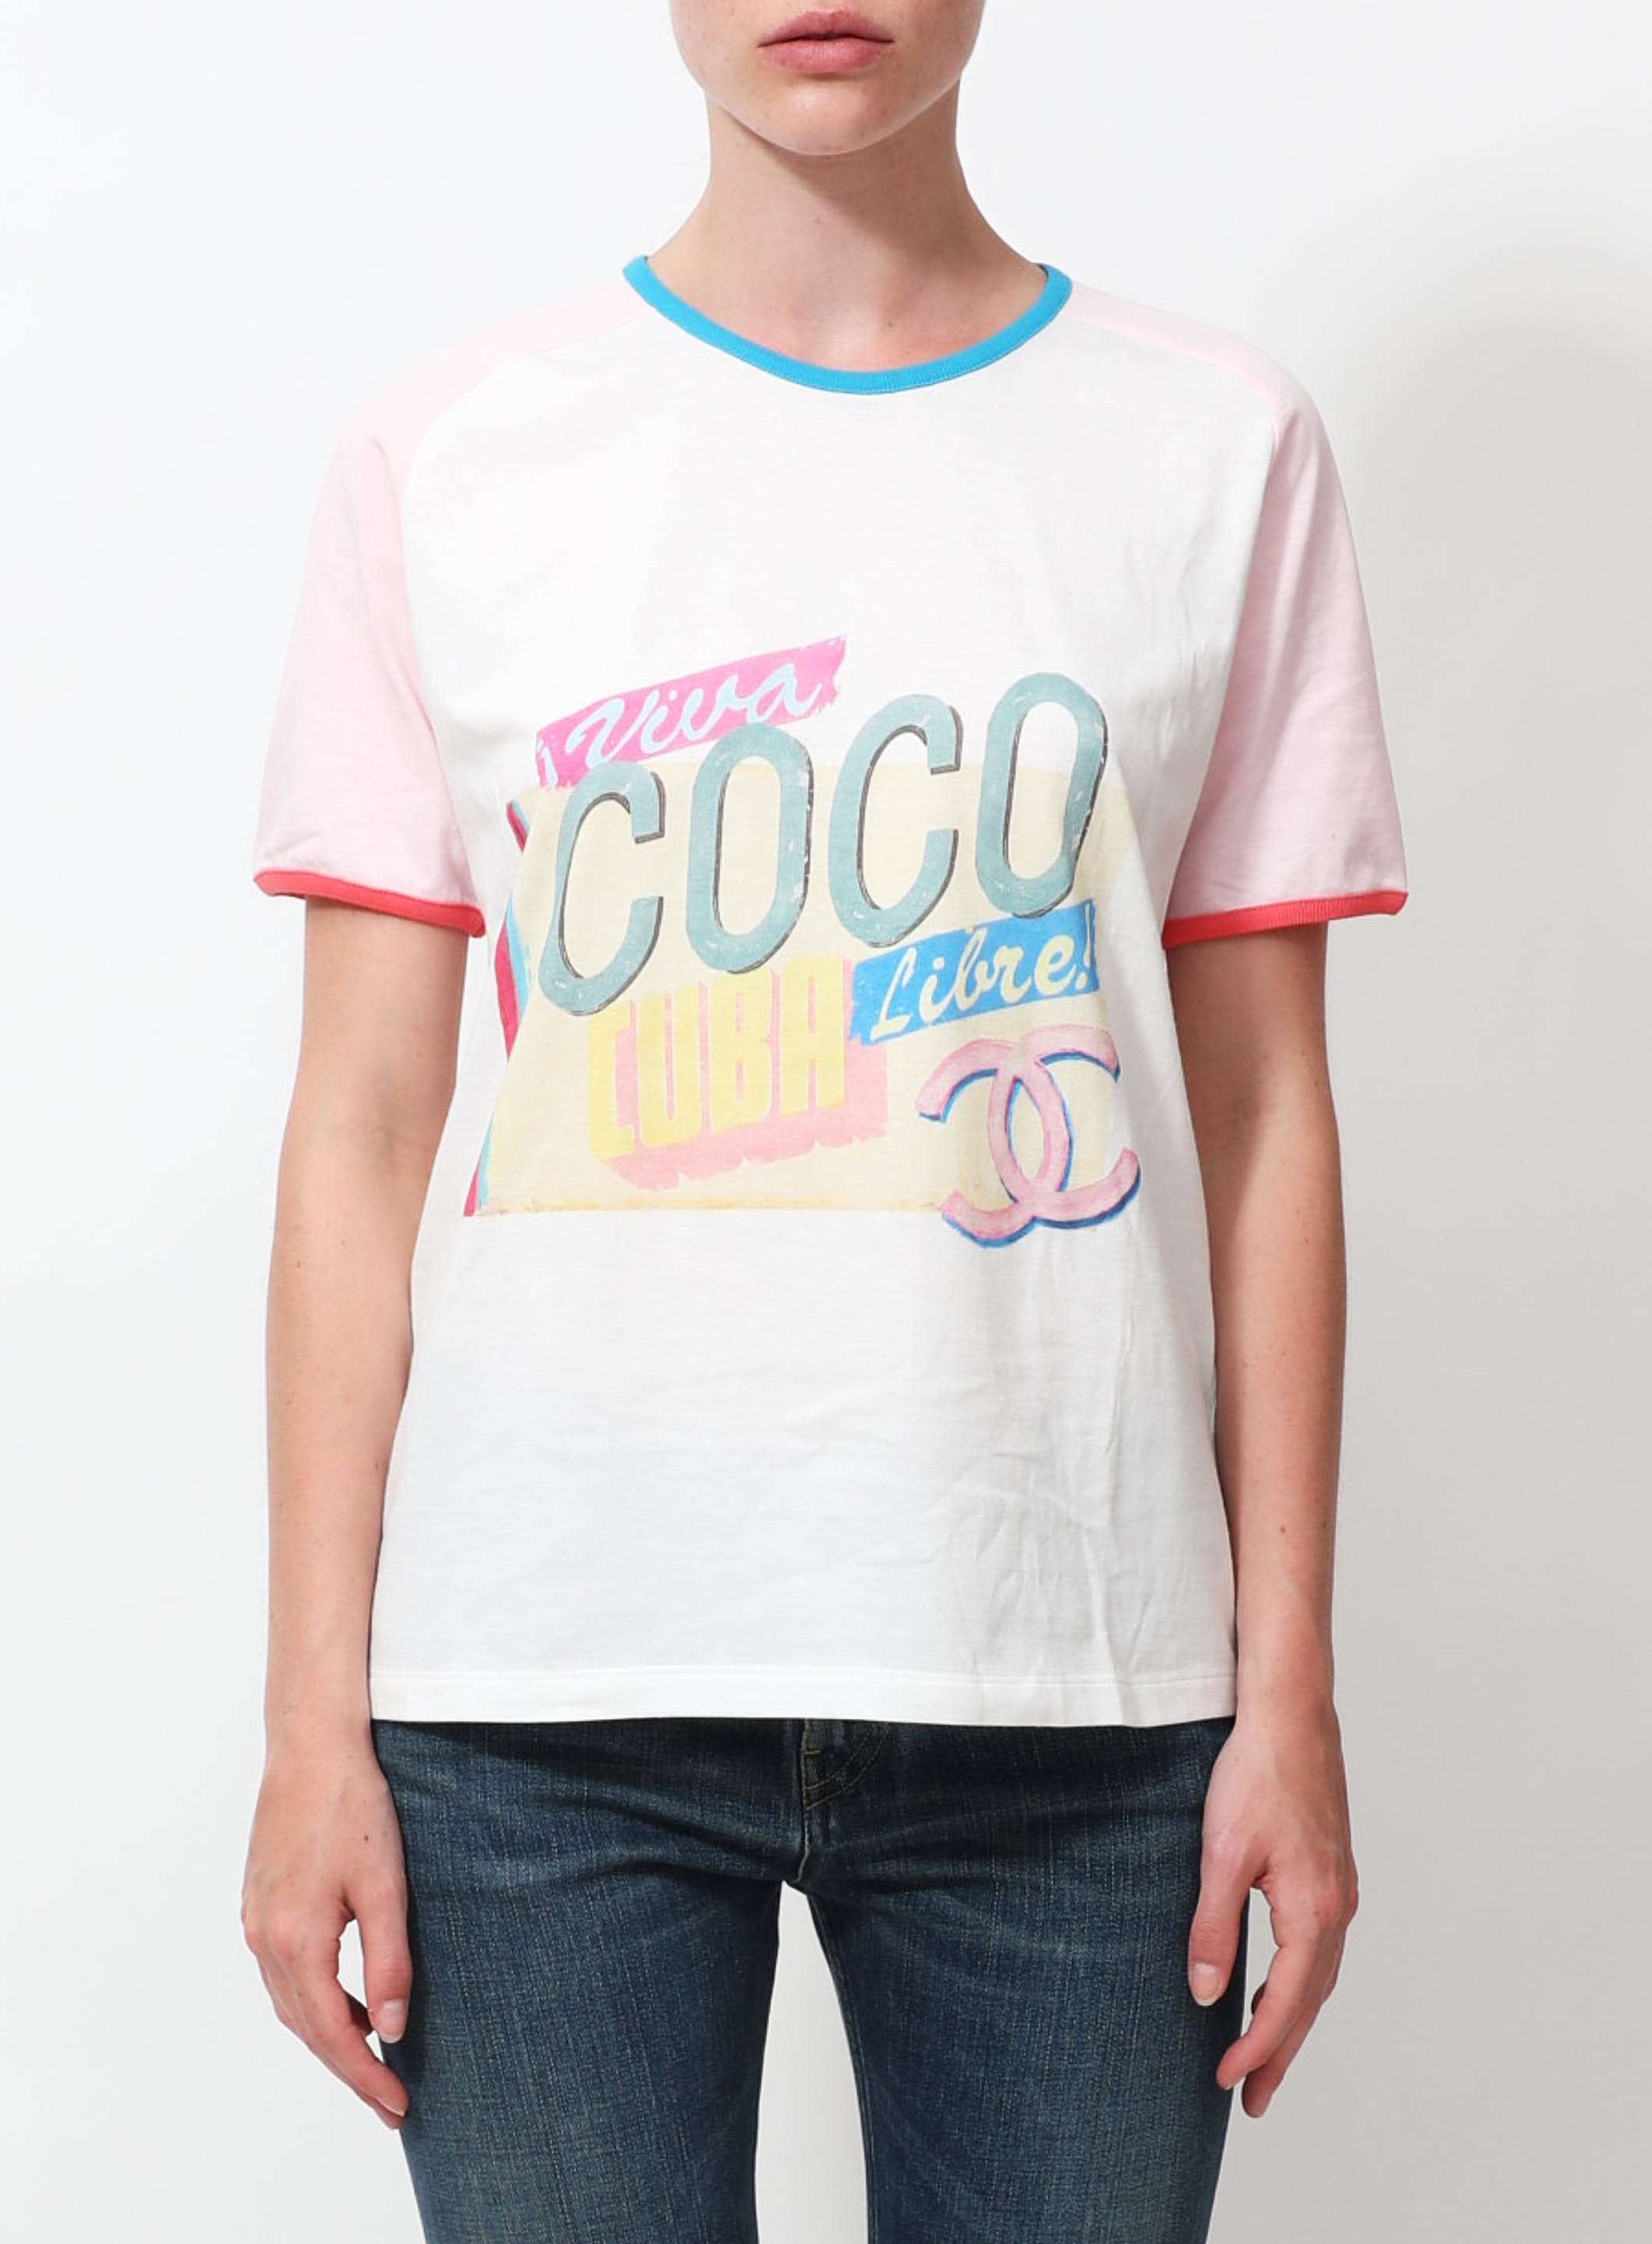 Resort 2017 'Coco Cuba' Graphic T-Shirt | Authentic & Vintage | ReSEE